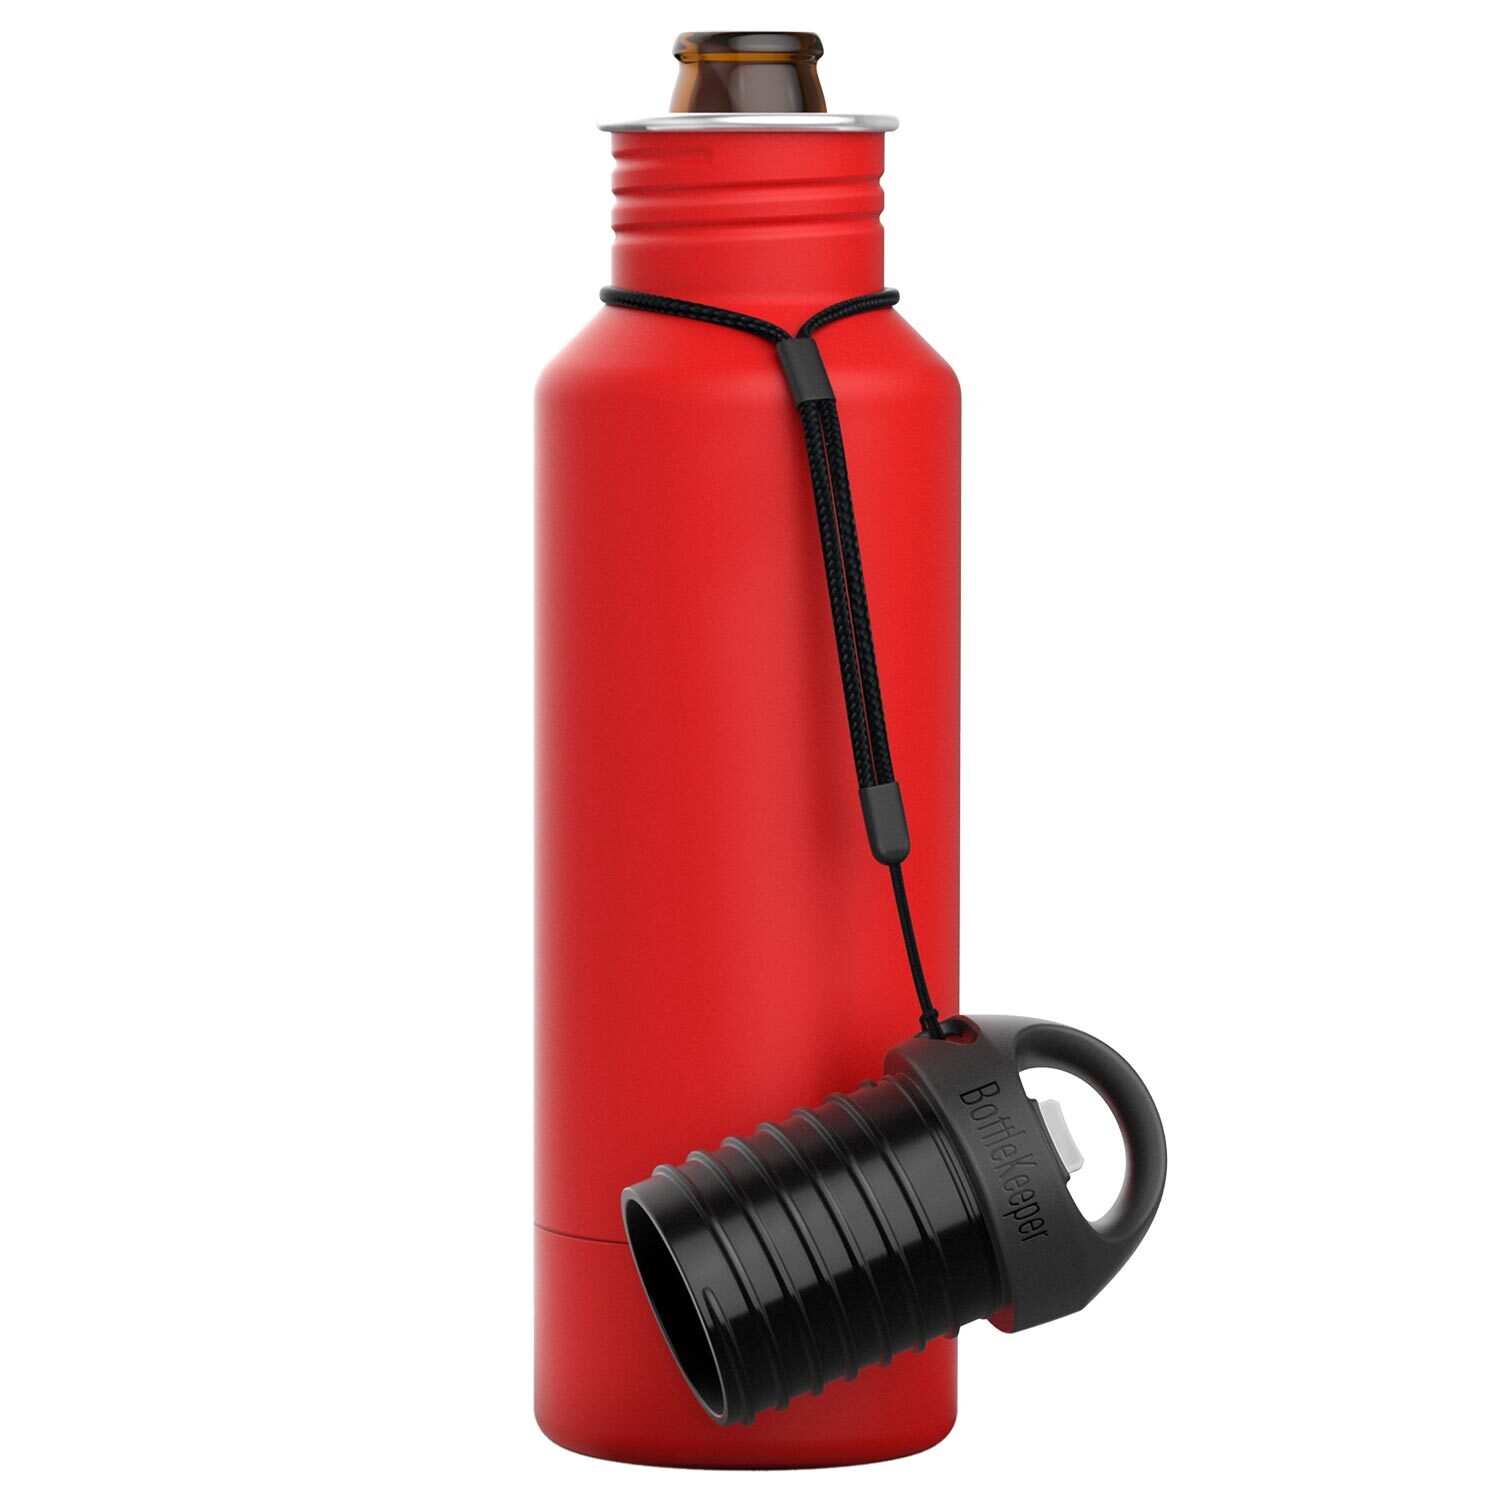 BottleKeeper Insulated Beer Bottle Holder — Tools and Toys